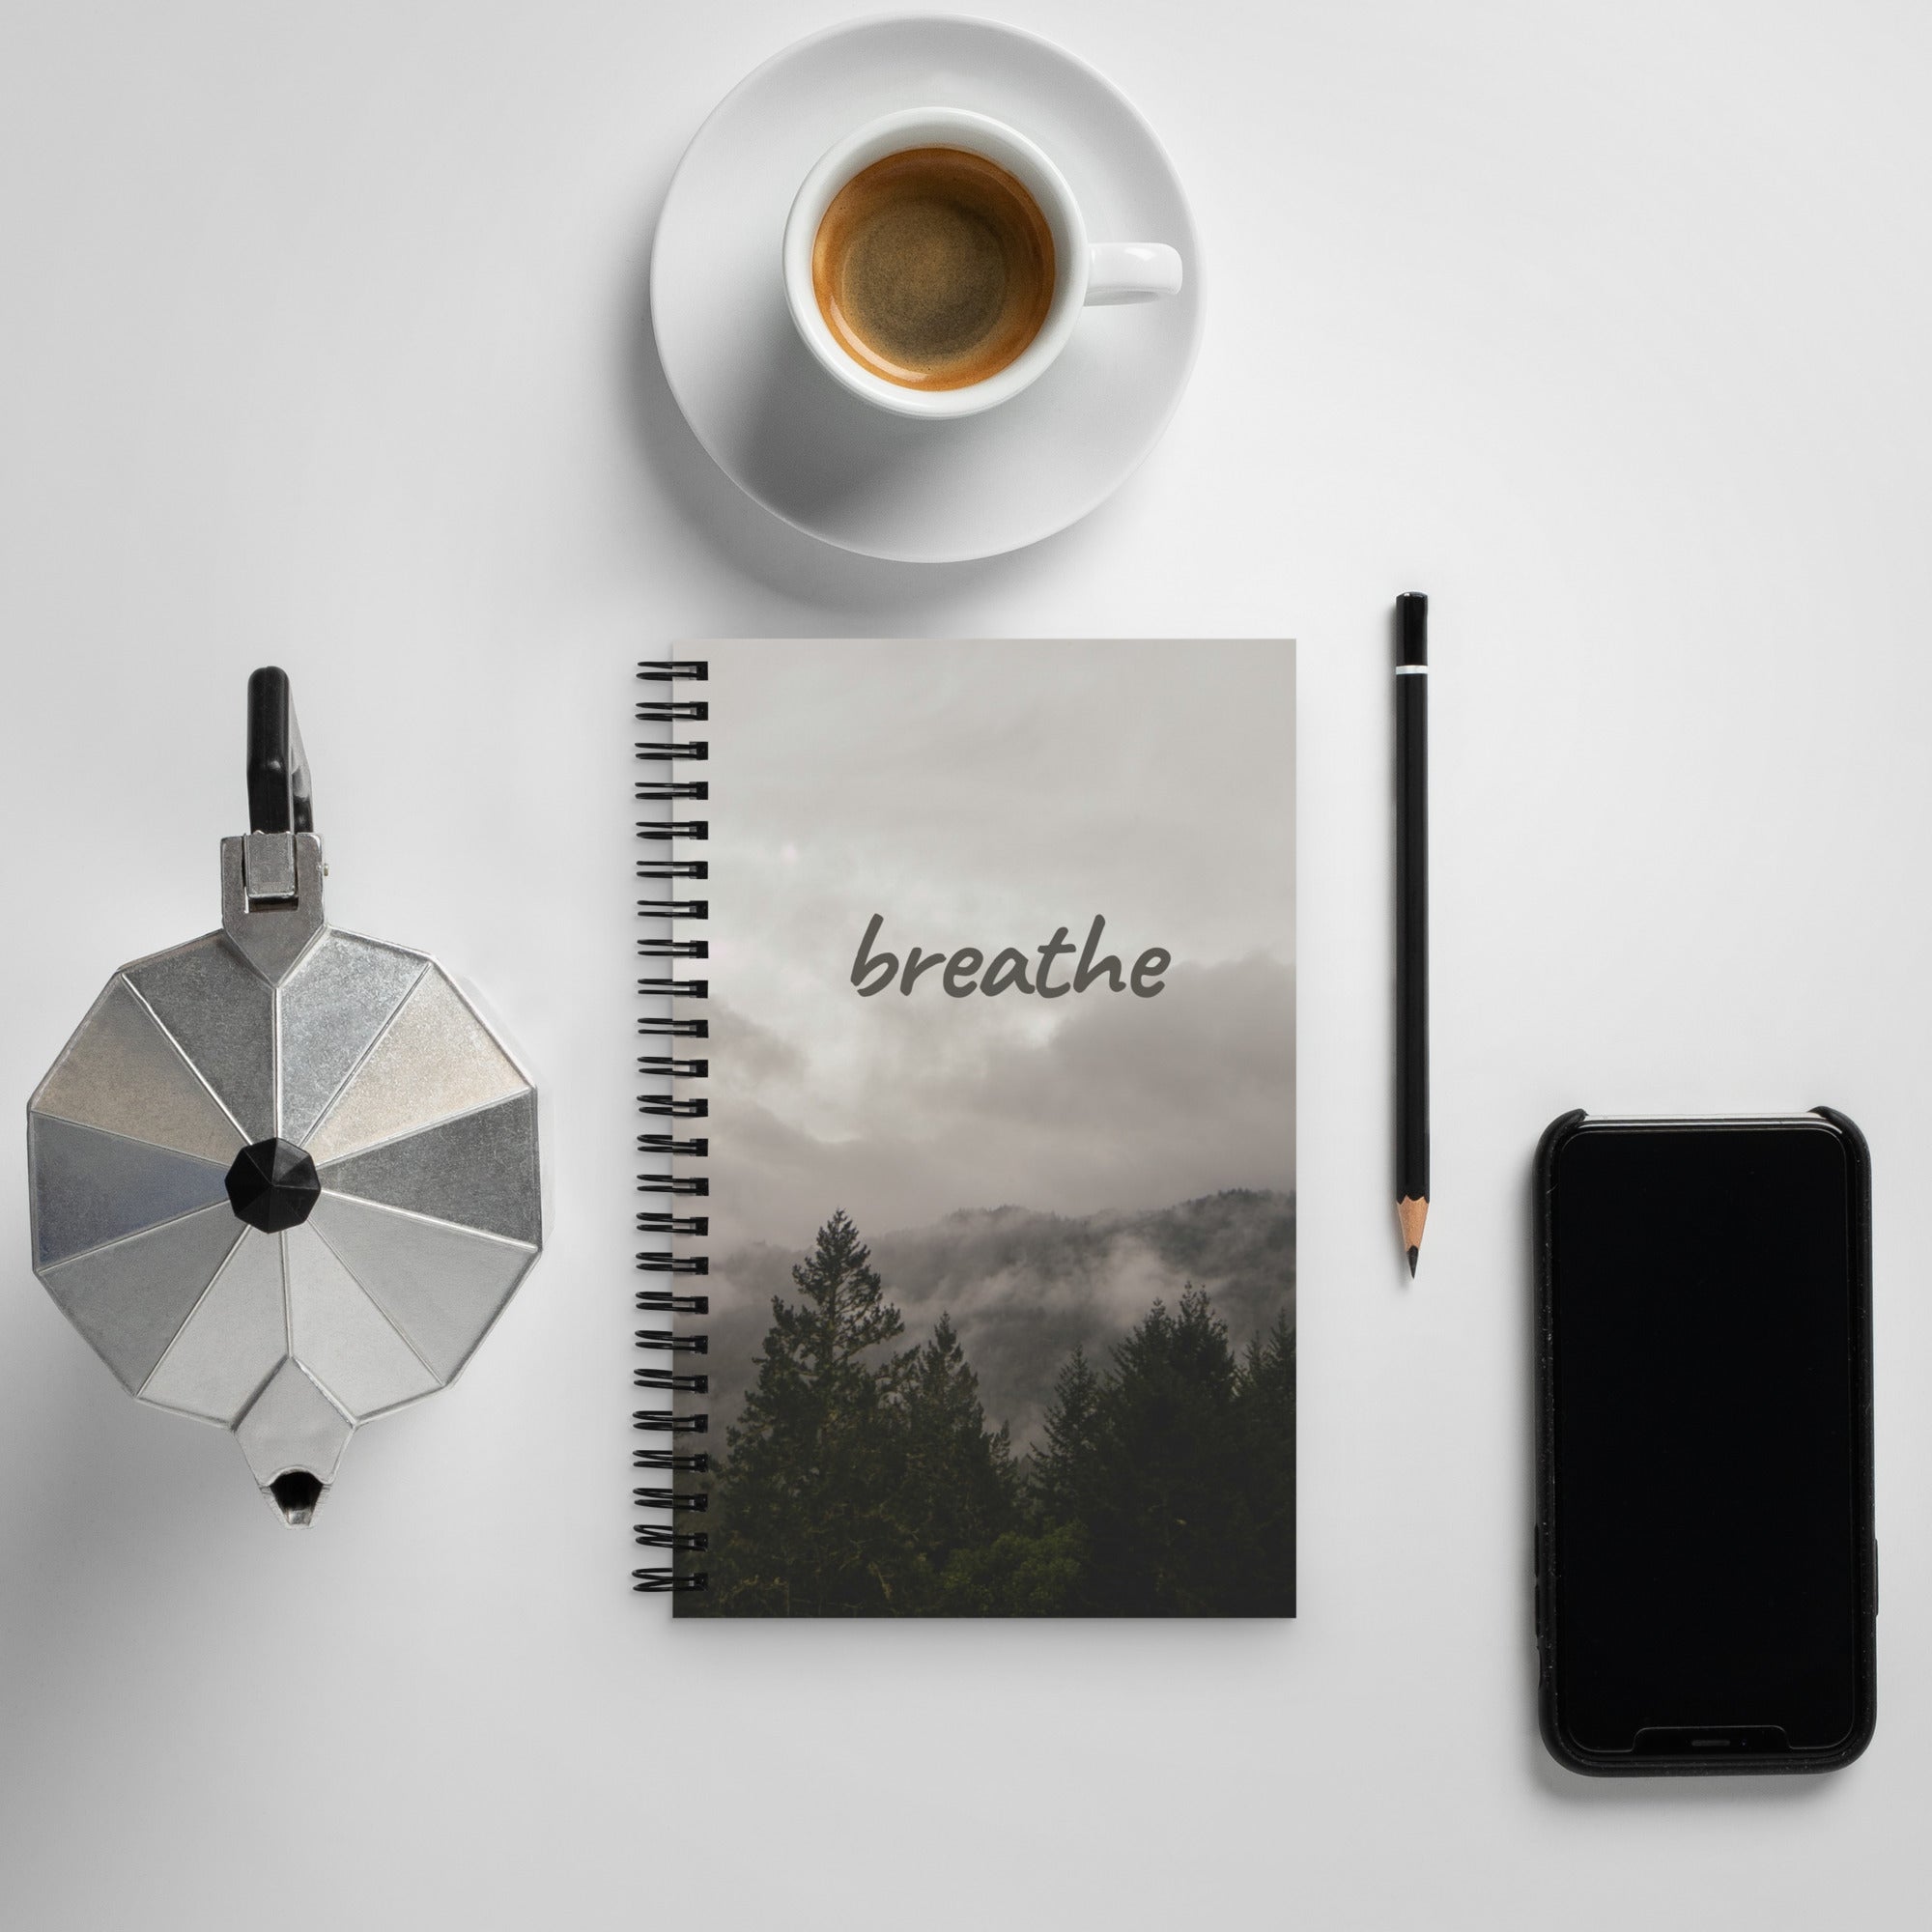 Breathe - A beautiful image and meaningful message - Spiral Notebook